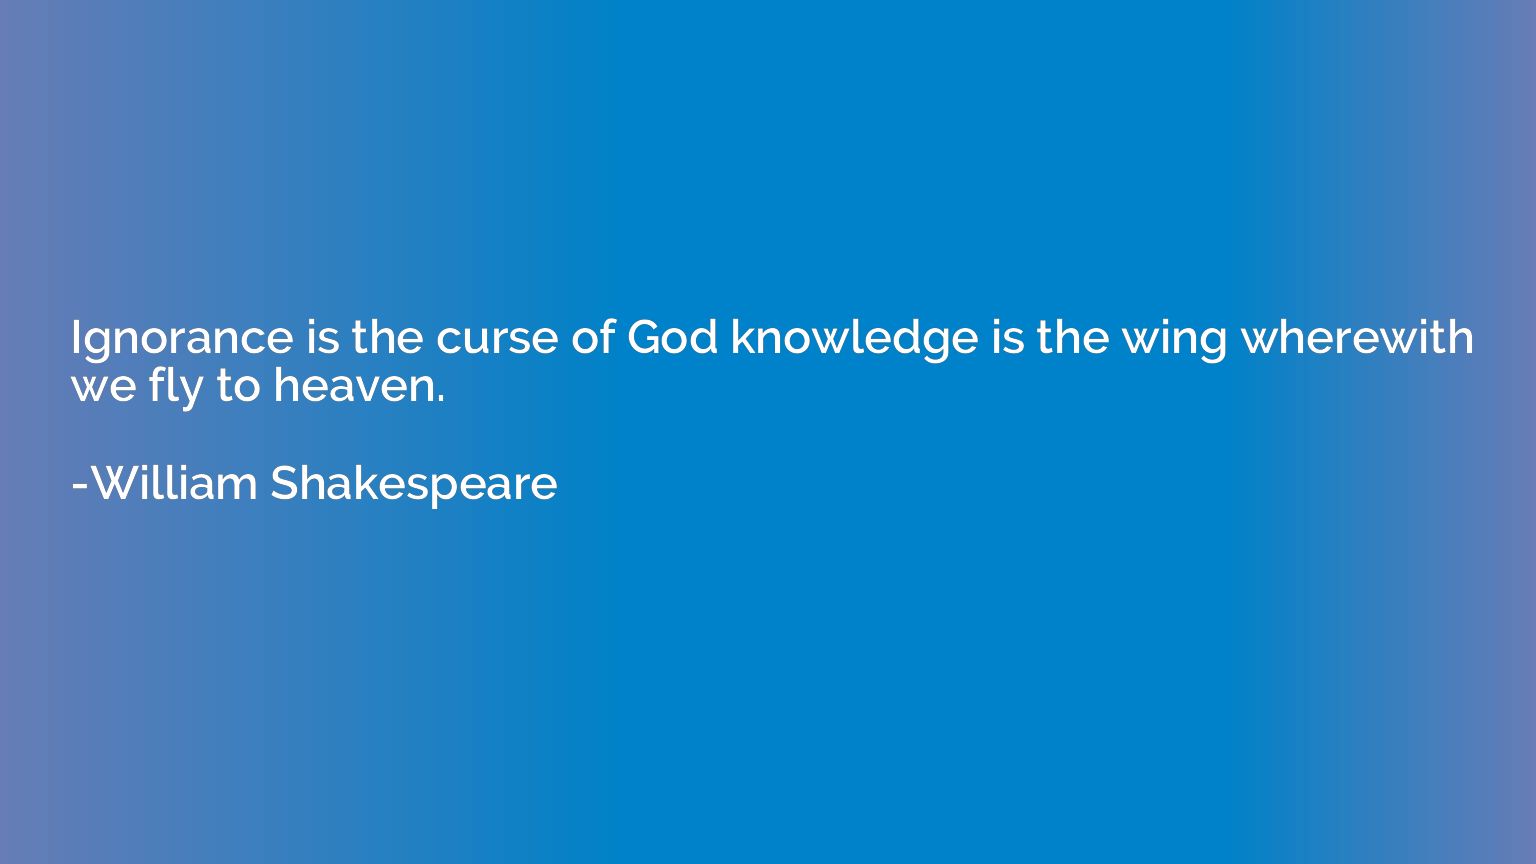 Ignorance is the curse of God knowledge is the wing wherewit